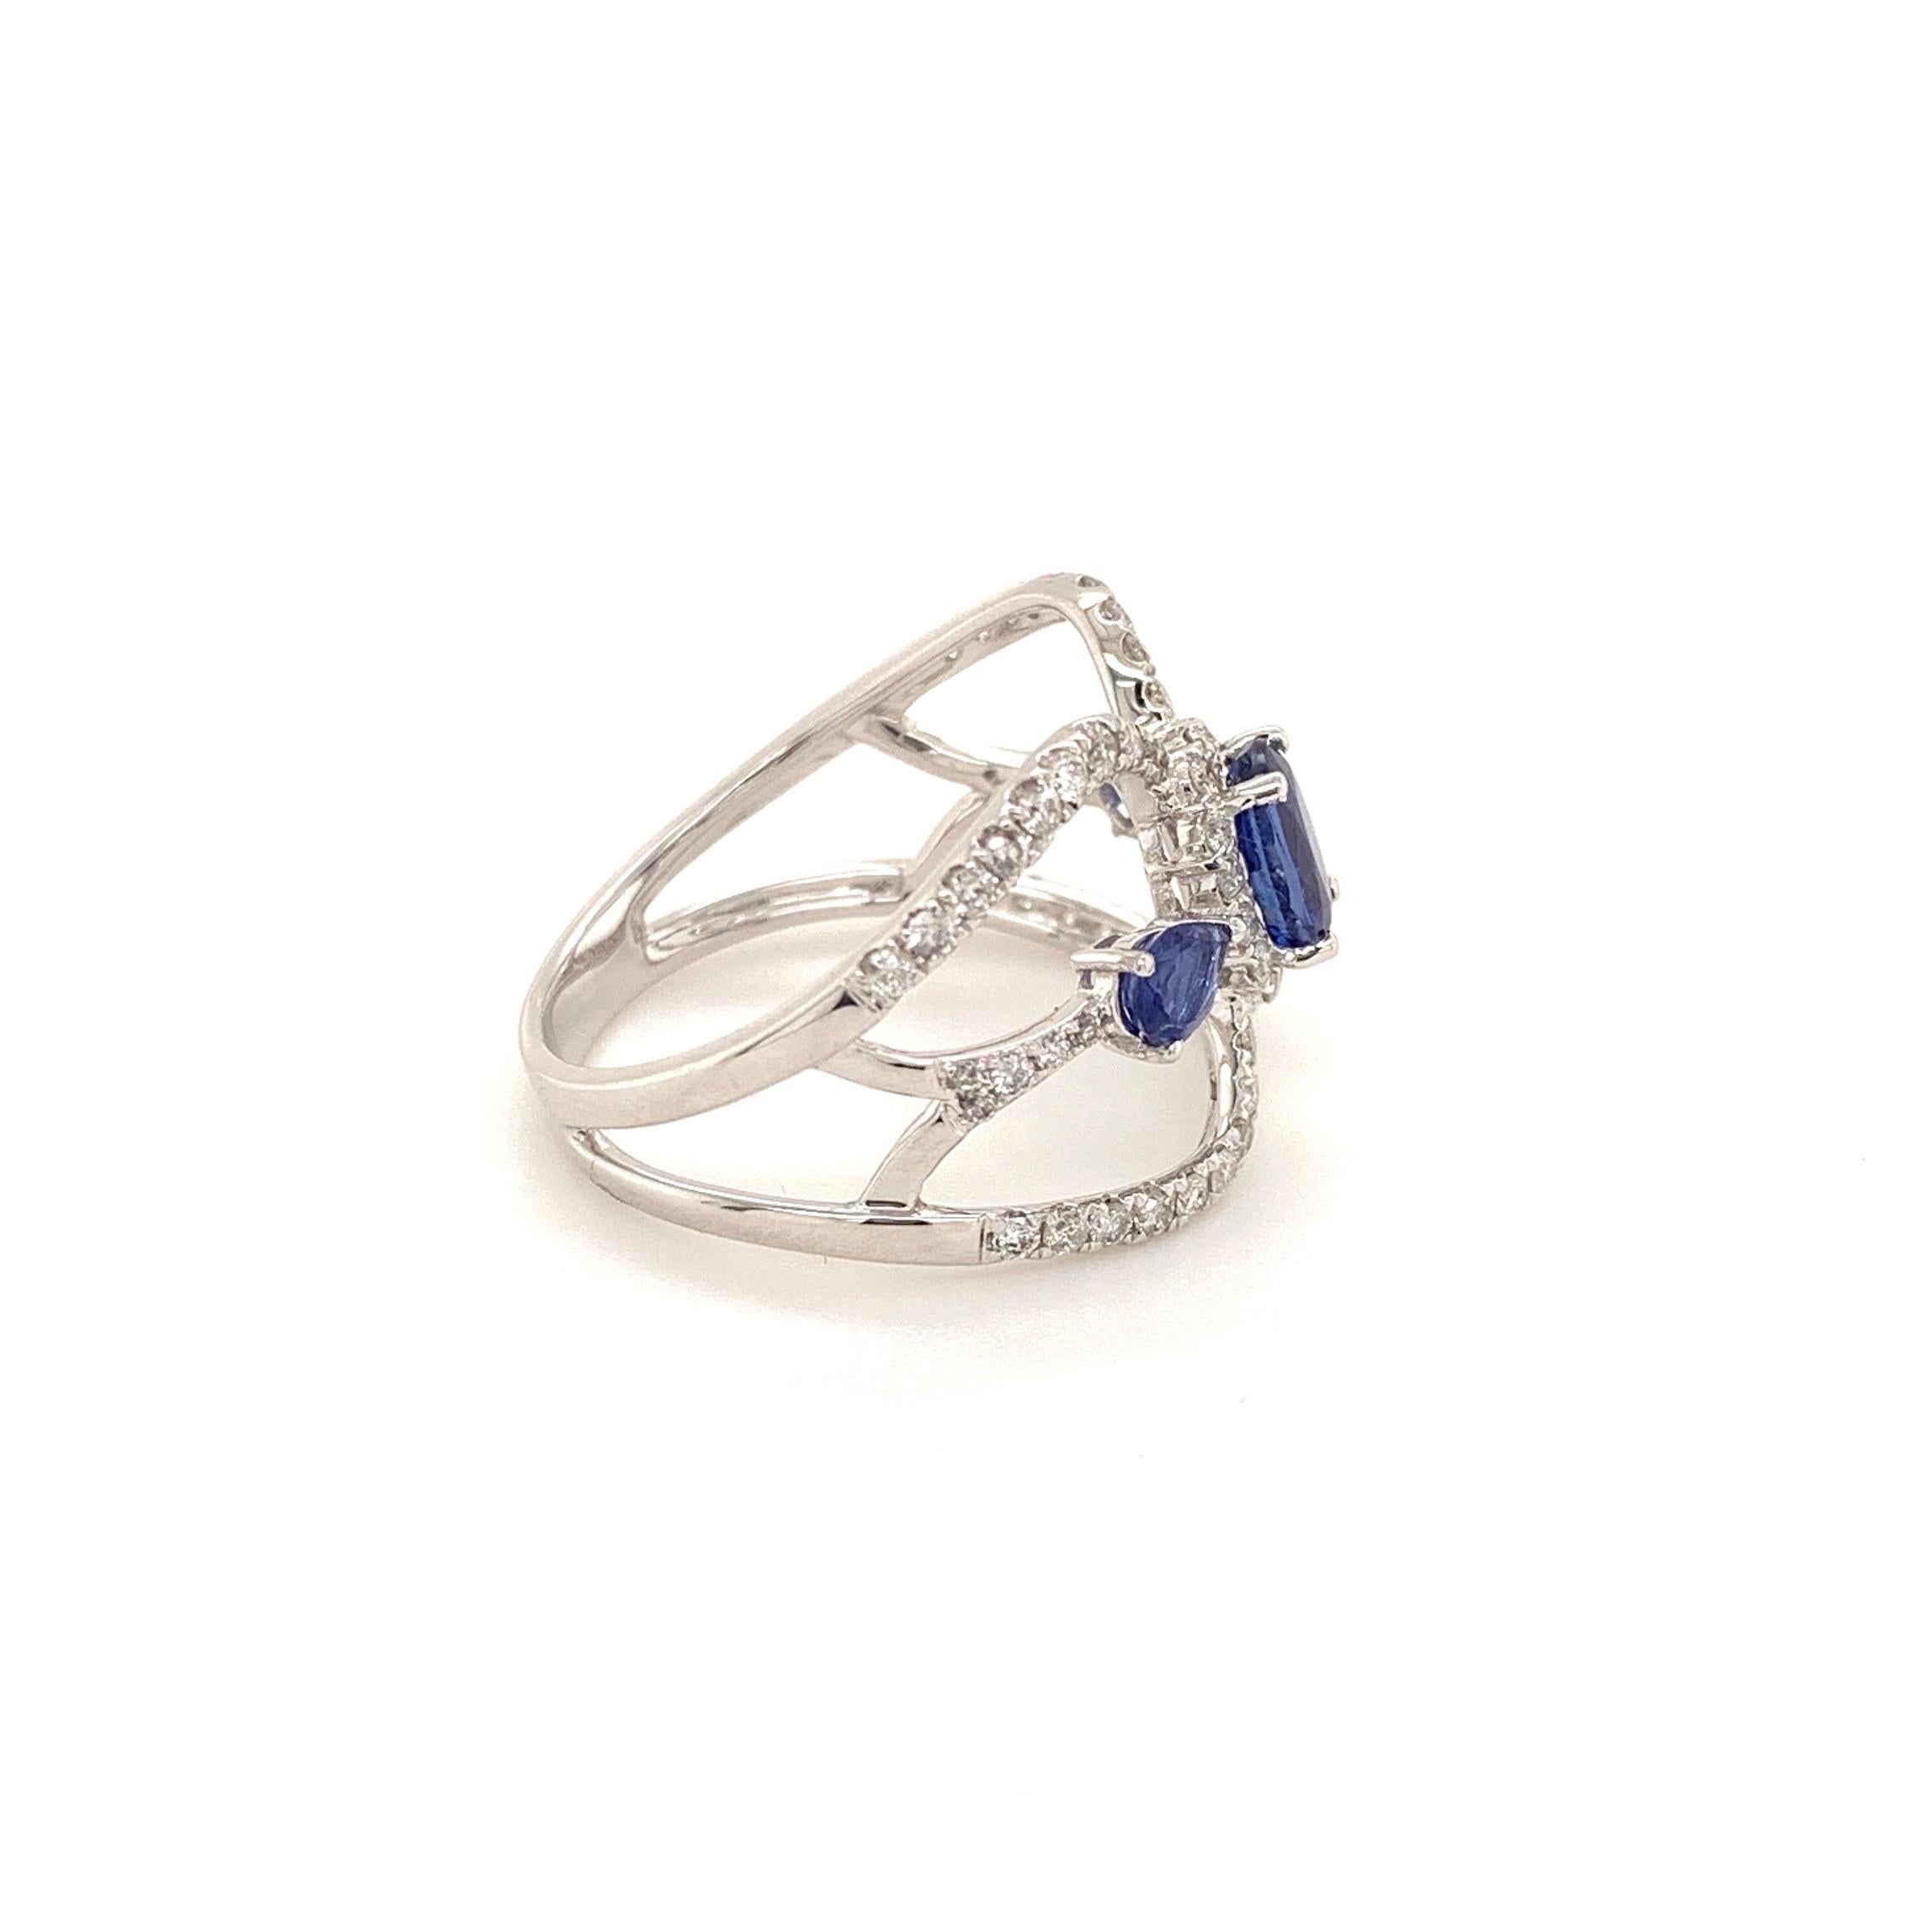 Striking design kyanite diamond ring. Royal blue, oval faceted 0.75 carat natural kyanite mounted in profile open basket with four prongs, accented with round brilliant cut diamonds with two pear faceted sapphires on the shoulder. Handcrafted